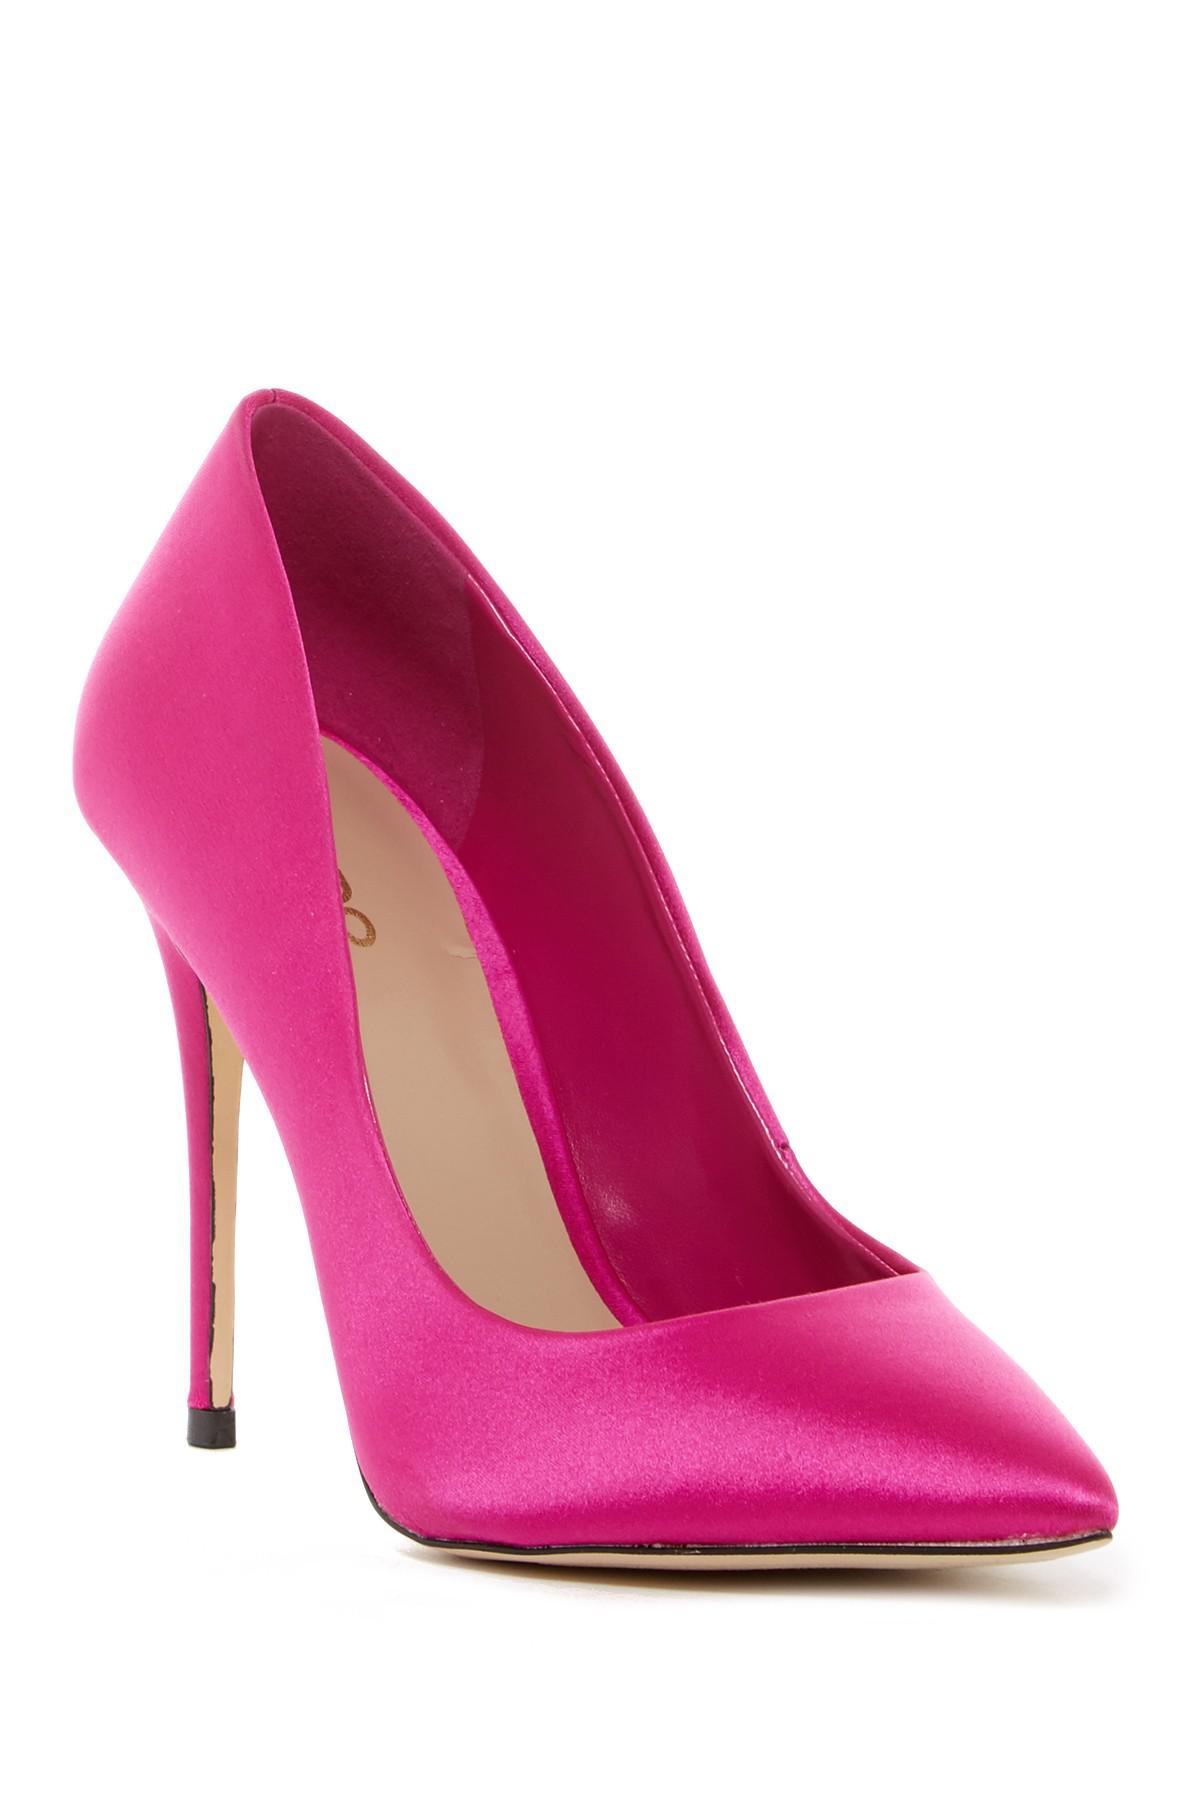 ALDO Synthetic Laralilla Pointed Toe Pump in Magenta (Pink) - Lyst